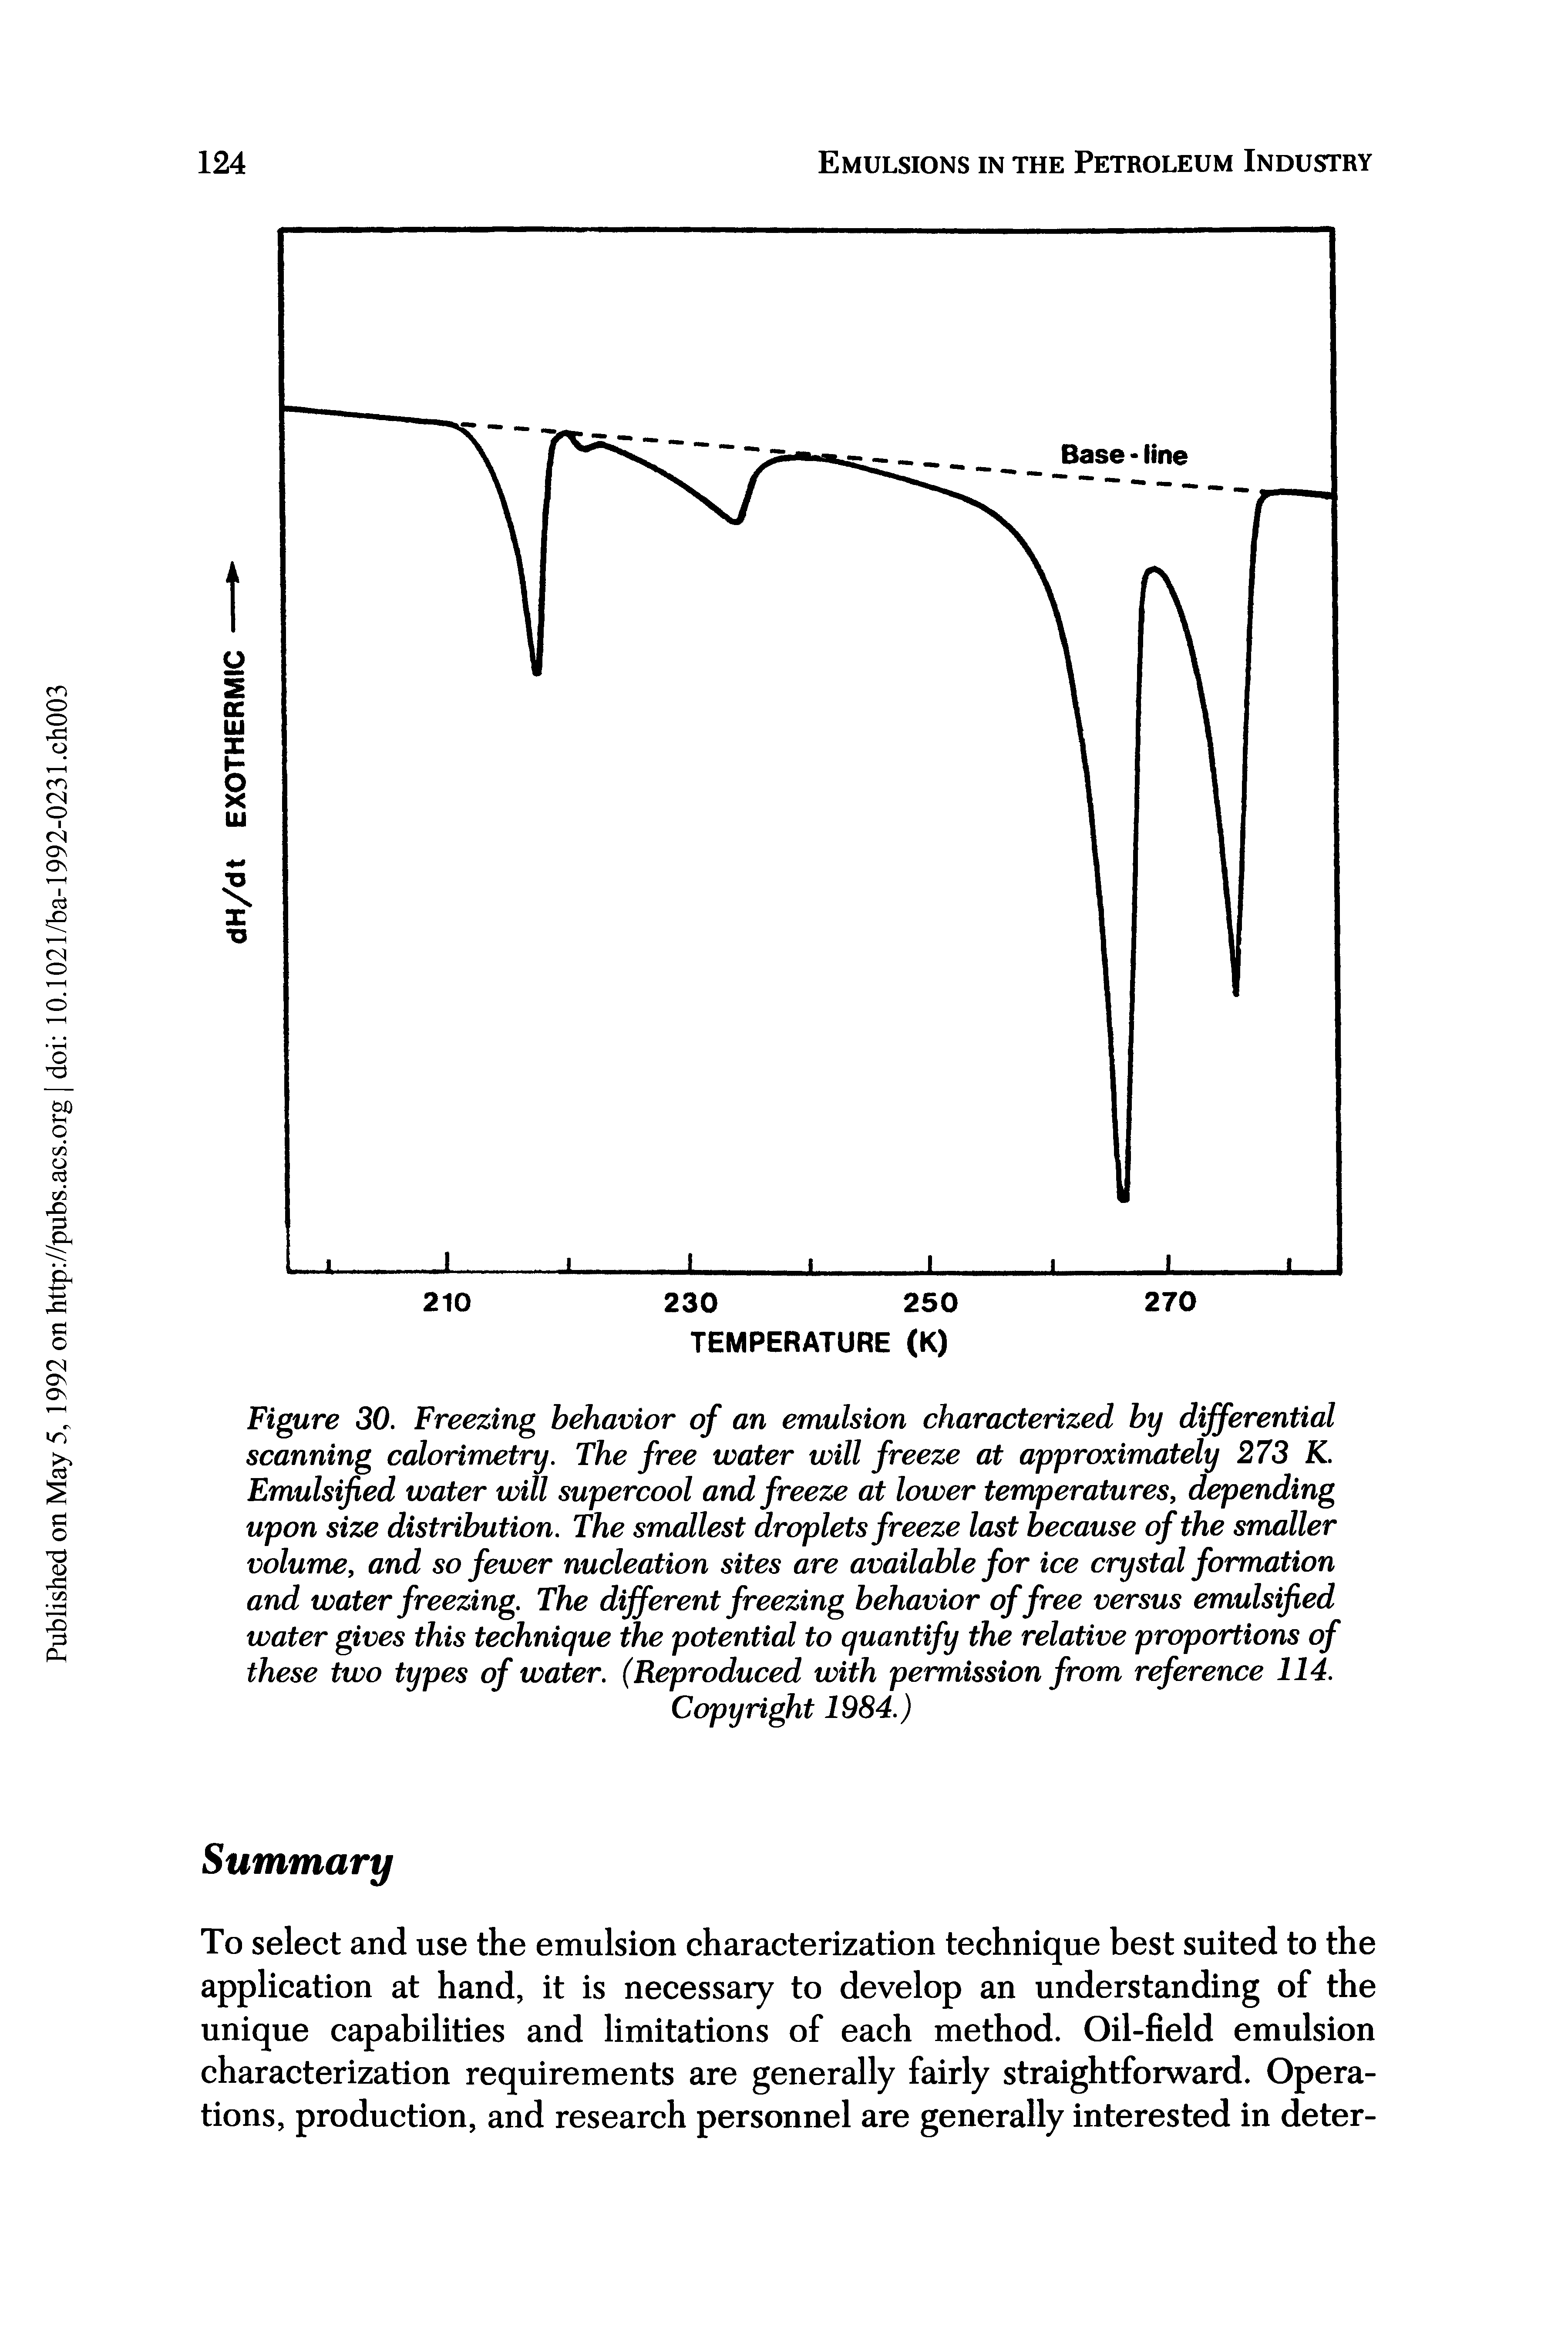 Figure 30. Freezing behavior of an emulsion characterized by differential scanning calorimetry. The free water will freeze at approximately 273 K. Emulsified water will supercool and freeze at lower temperatures, depending upon size distribution. The smallest droplets freeze last because of the smaller volume, and so fewer nucleation sites are available for ice crystal formation and water freezing. The different freezing behavior of free versus emulsified water gives this technique the potential to quantify the relative proportions of these two types of water. (Reproduced with permission from reference 114.